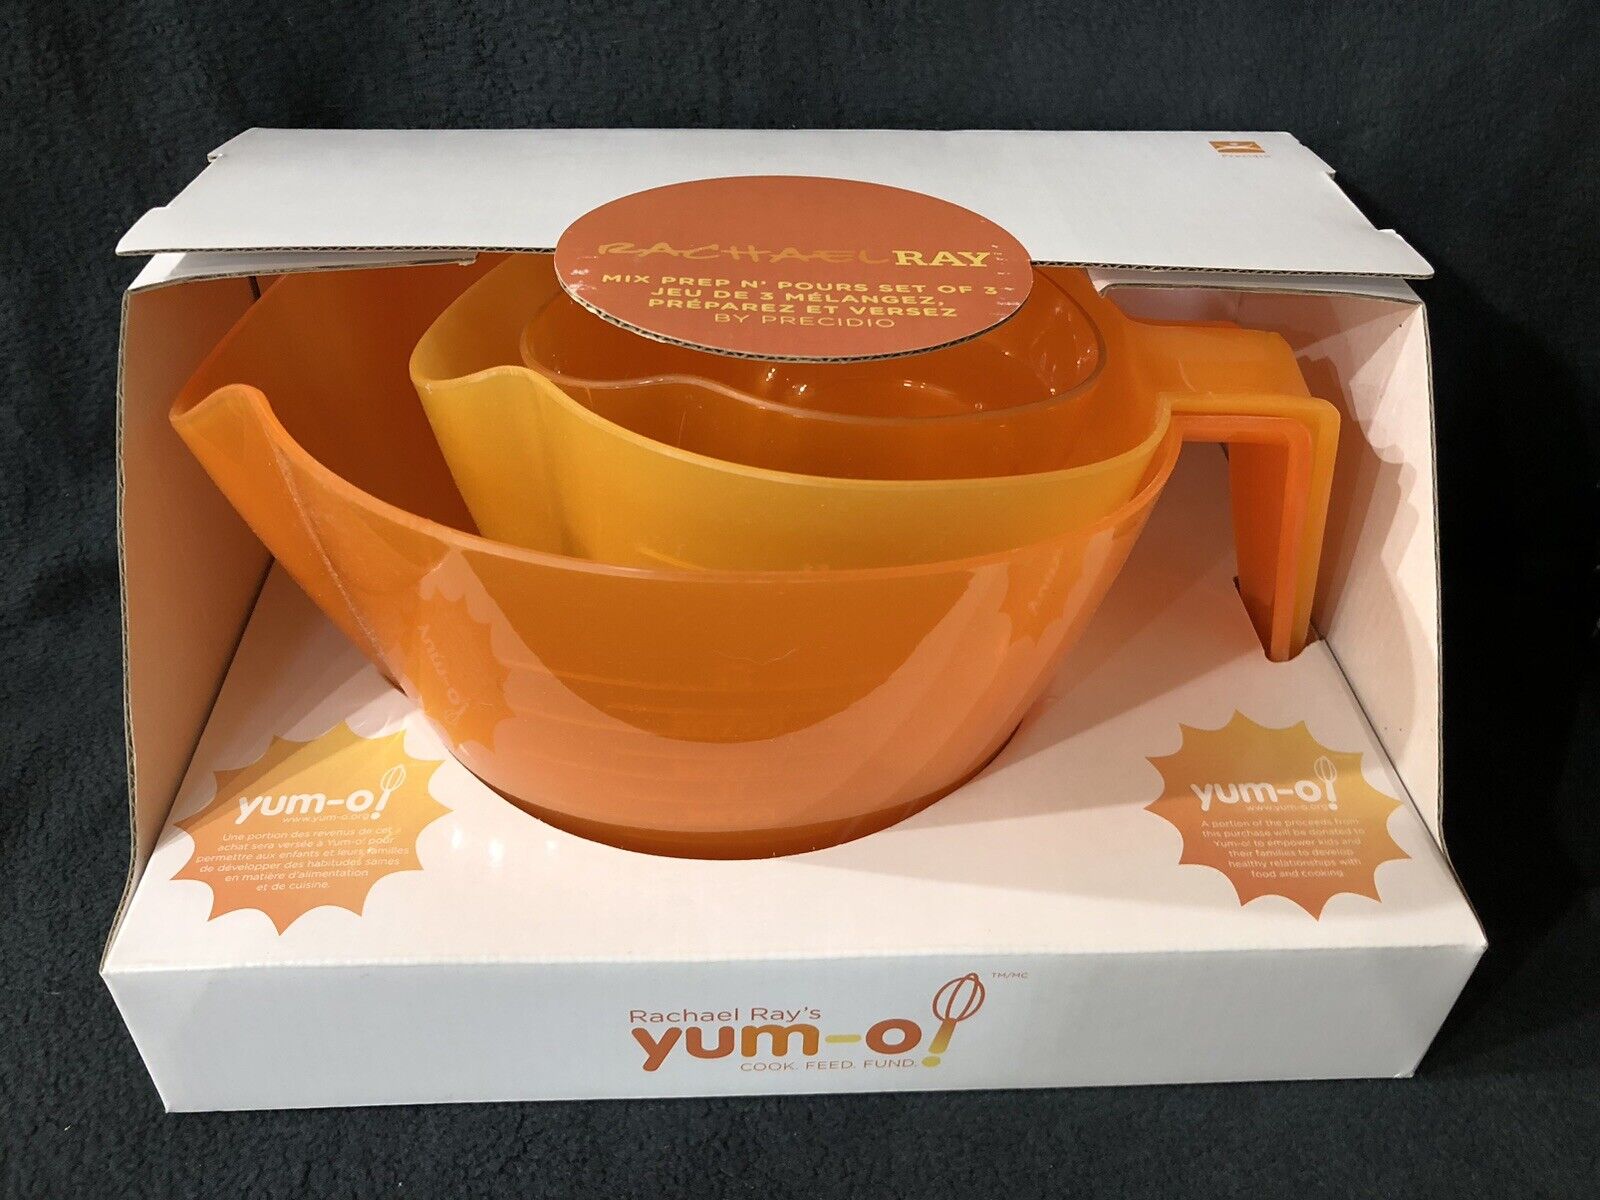 New Rachael Ray Mix Prep N Pours Set of 3 Mixing Measuring Bowls